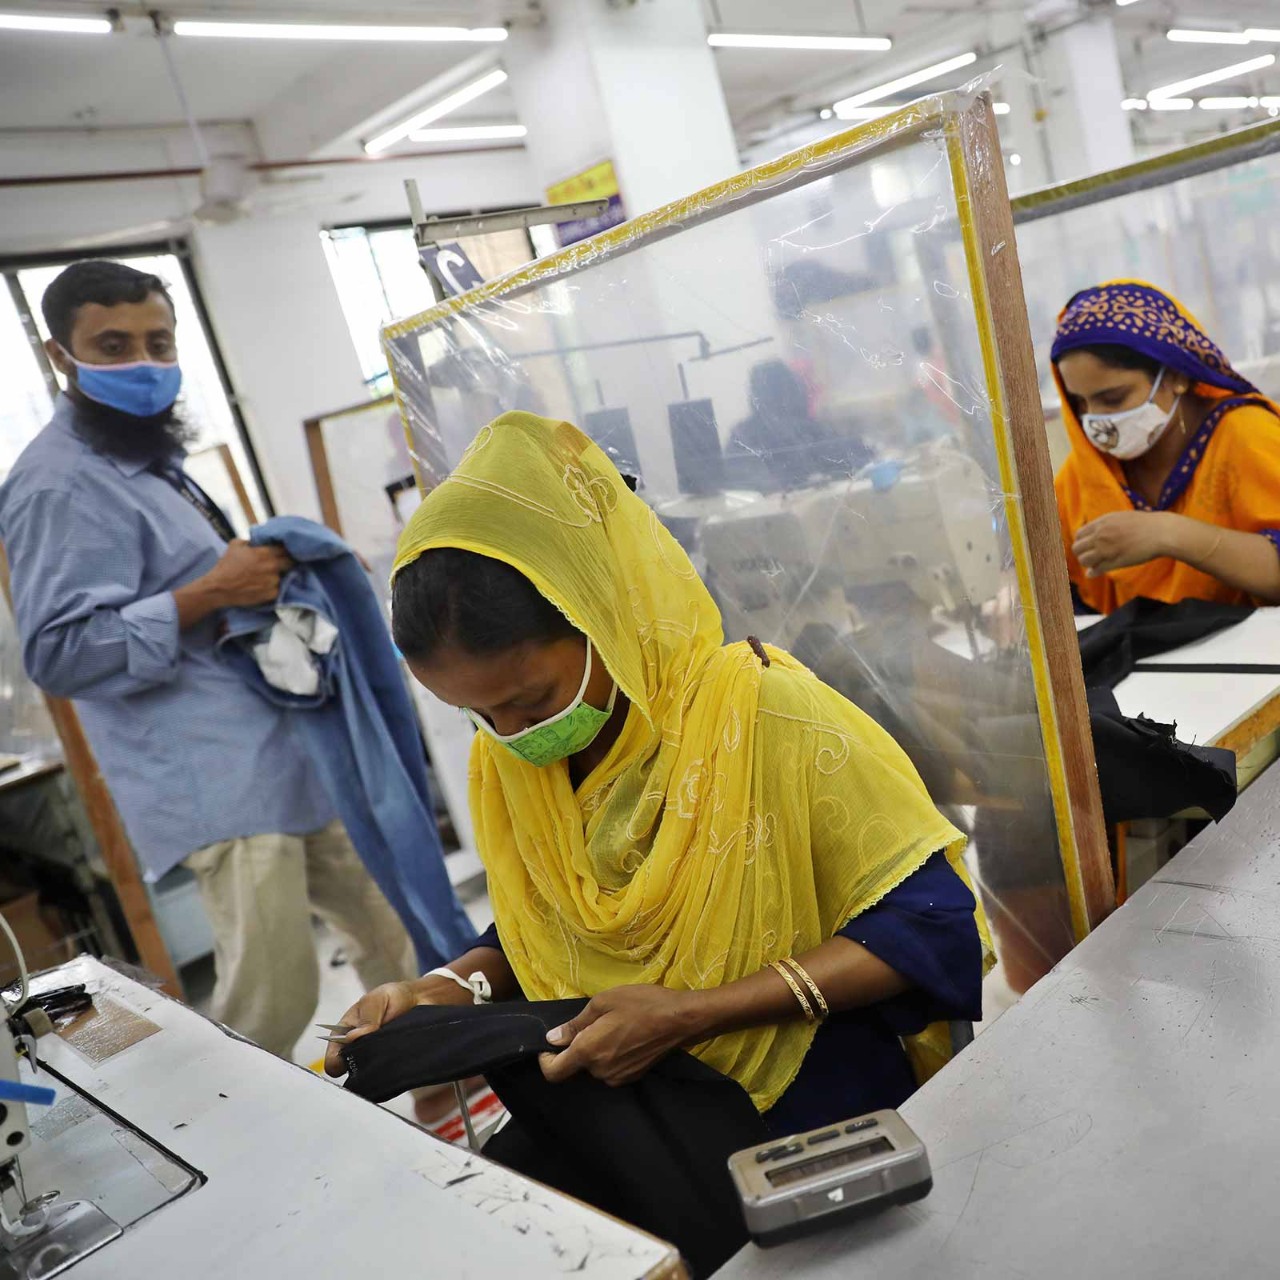 Conditions in garment factories in Dhaka are reported to have improved greatly